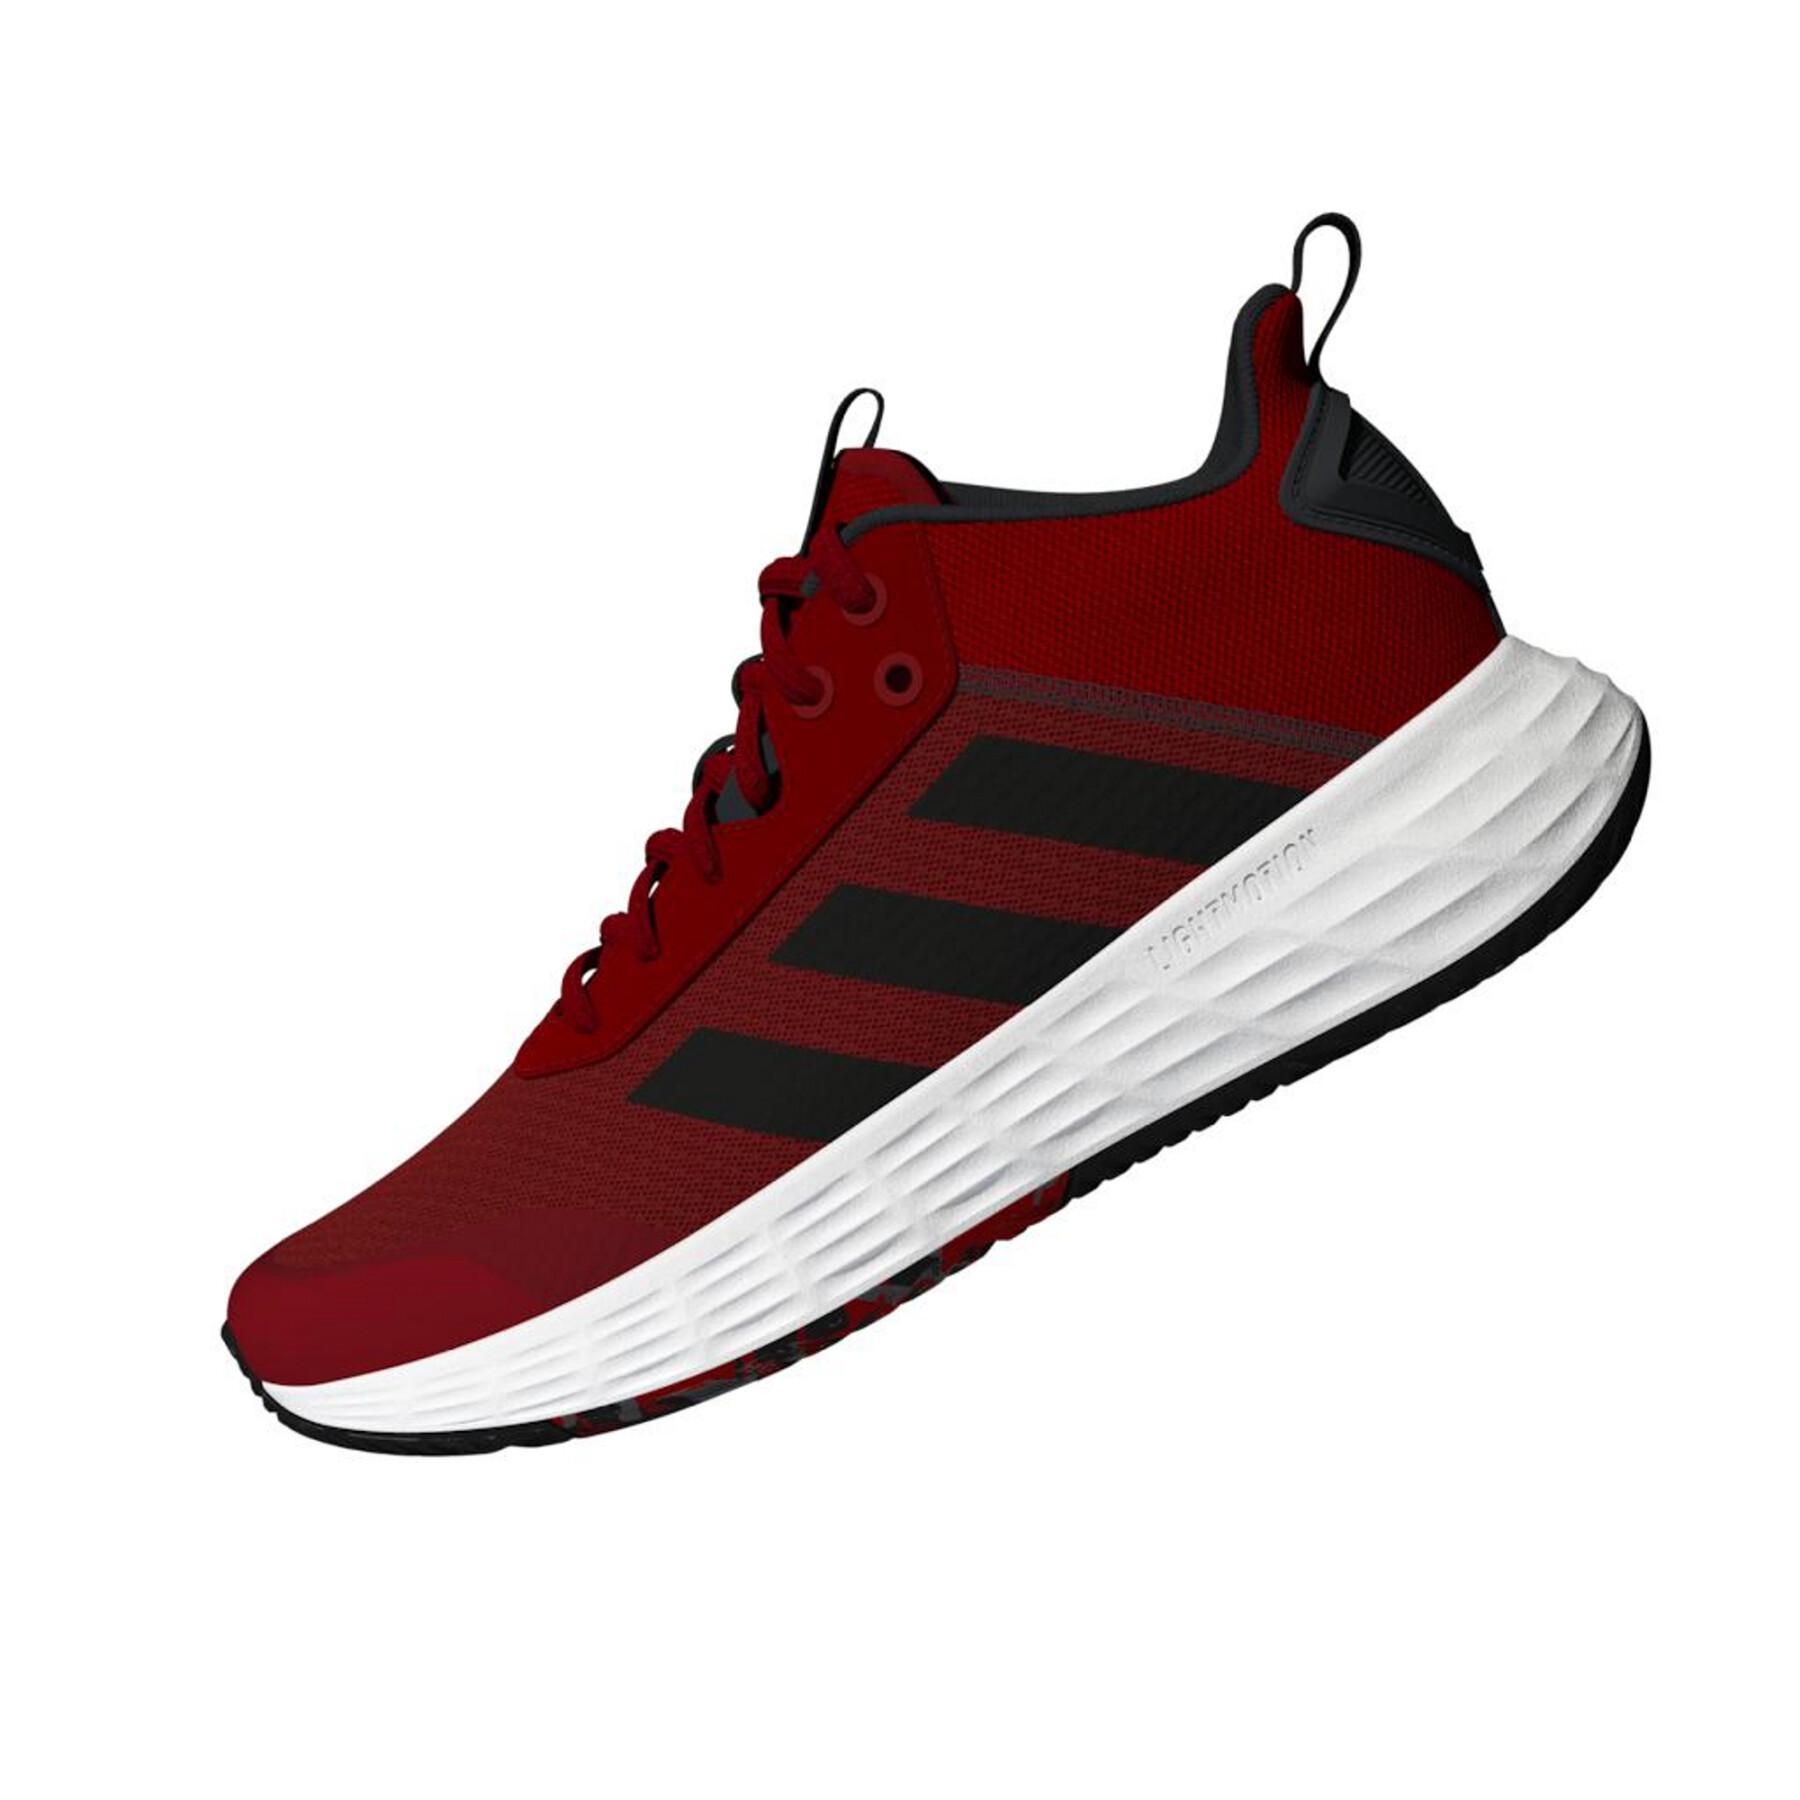 Indoor shoes adidas Ownthegame